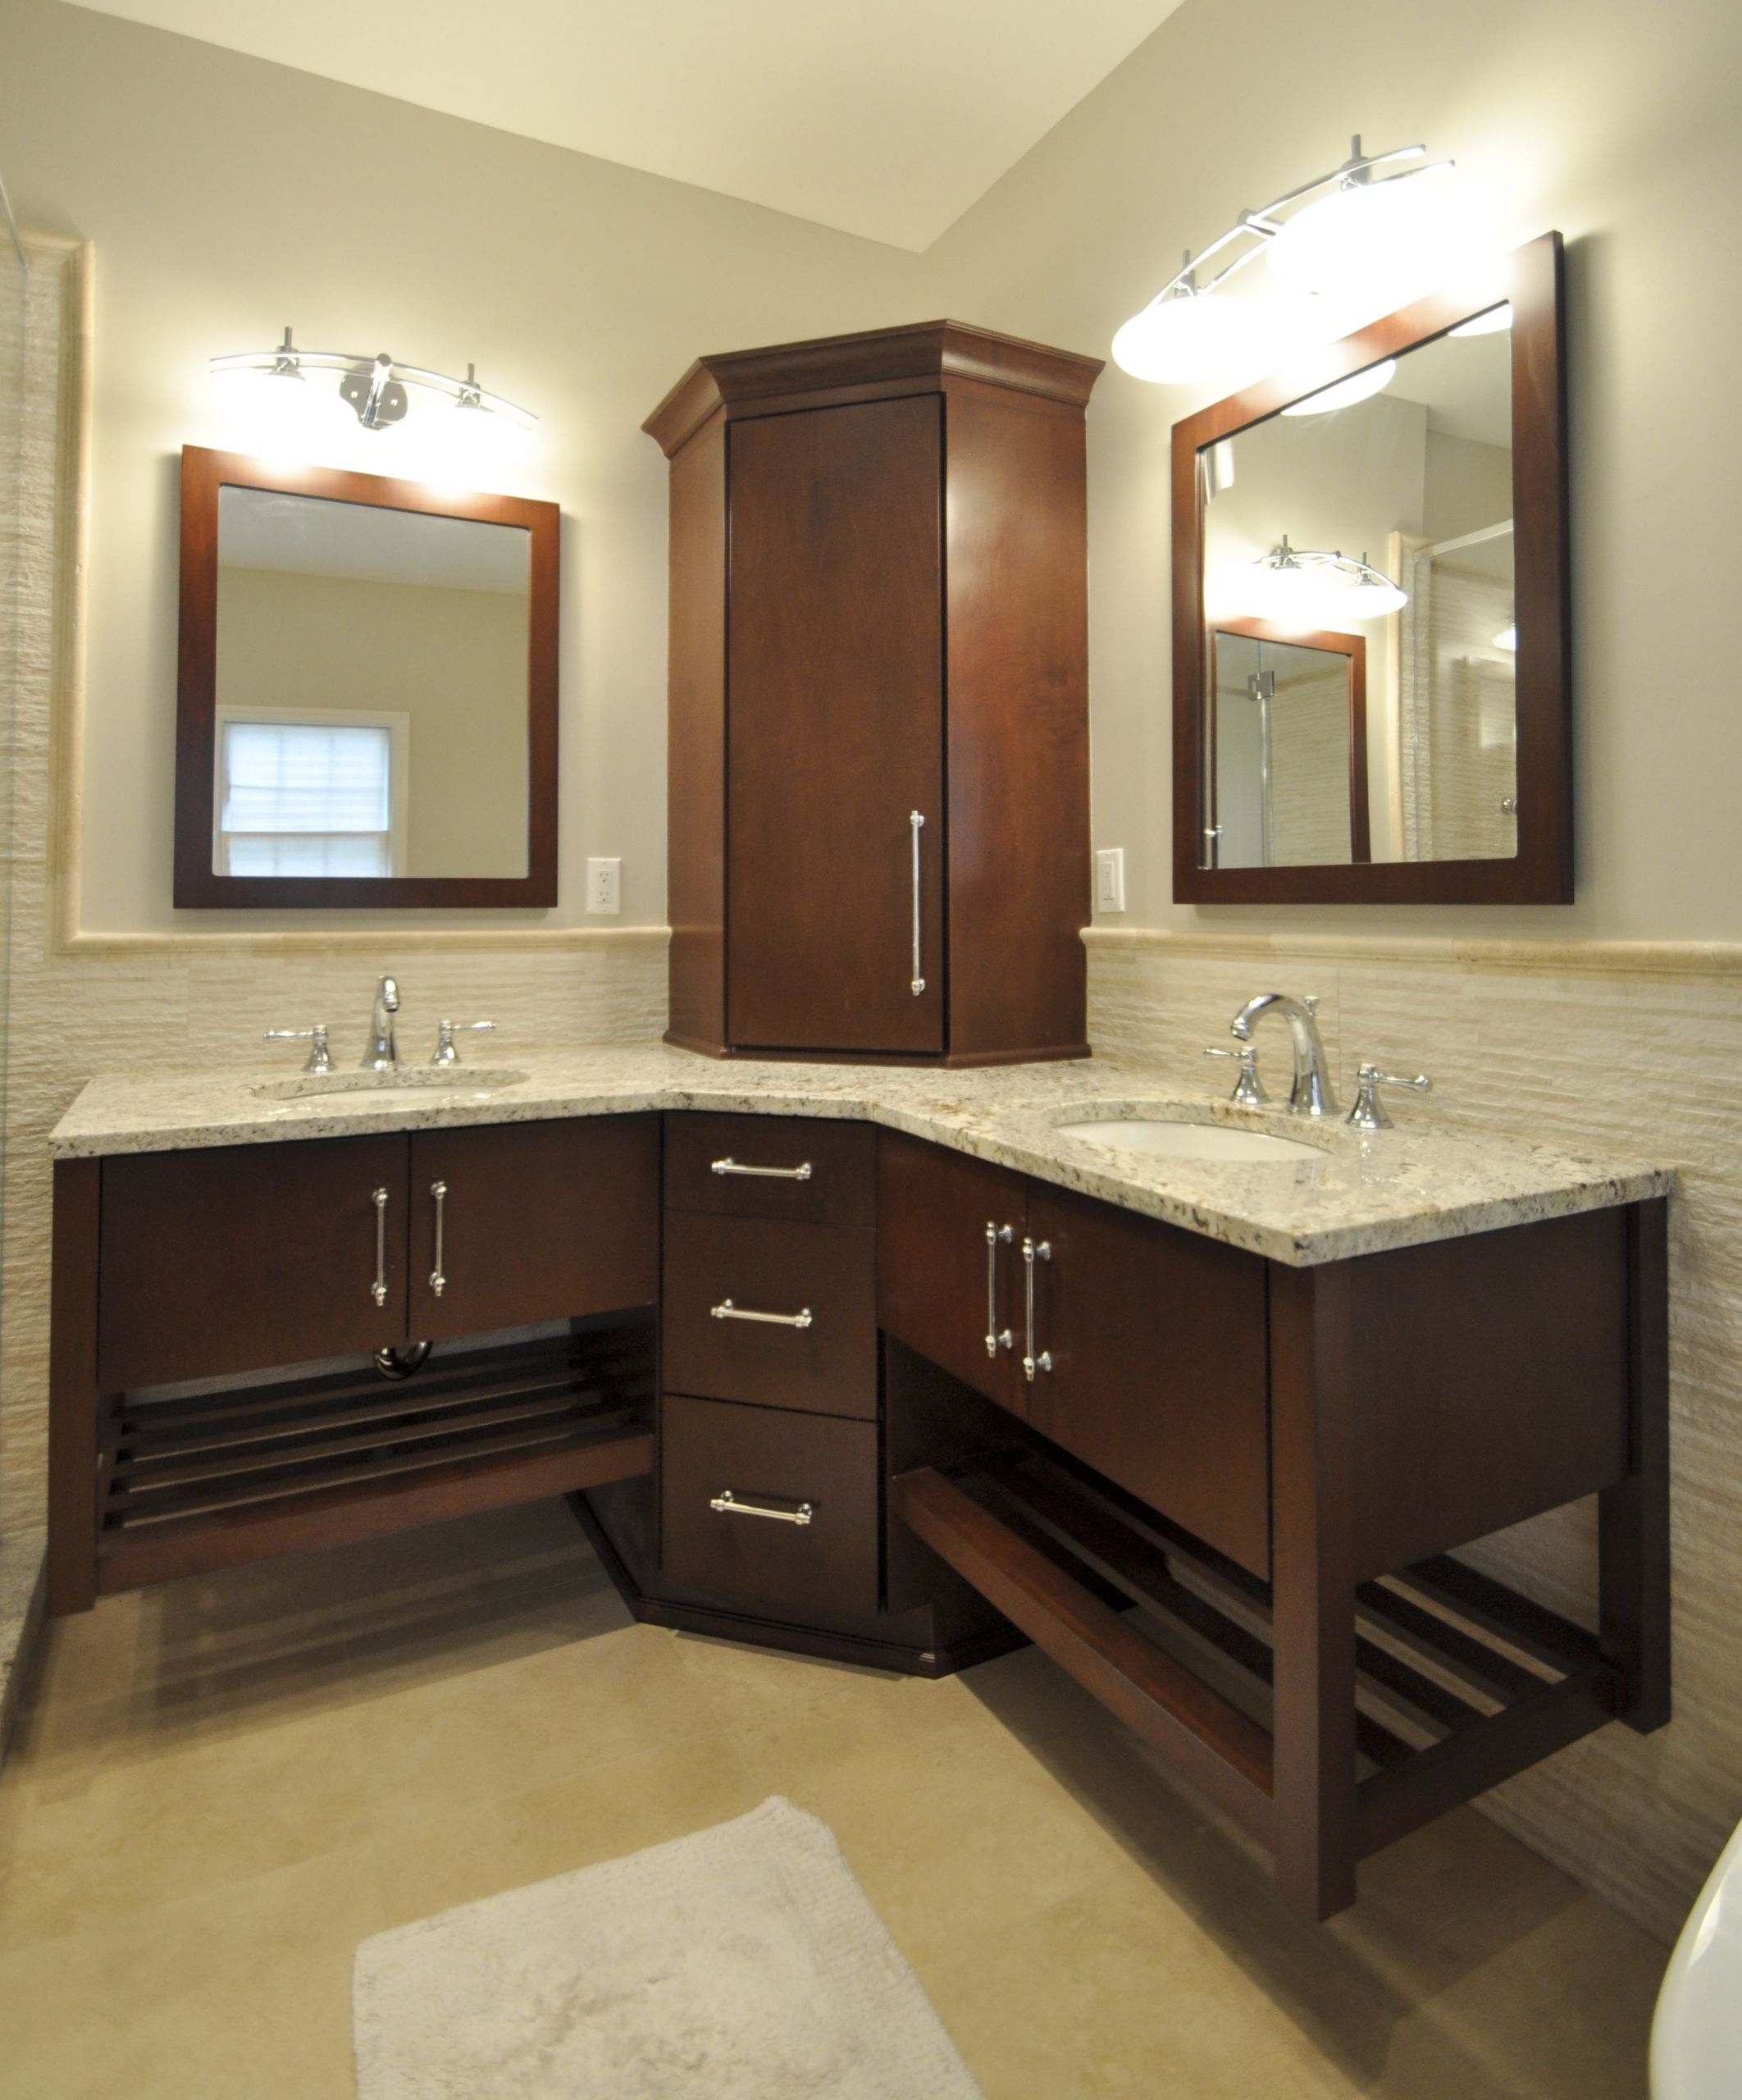 L Shaped Bathroom Vanity
 Corner wall hung vanity with corner tower and matching